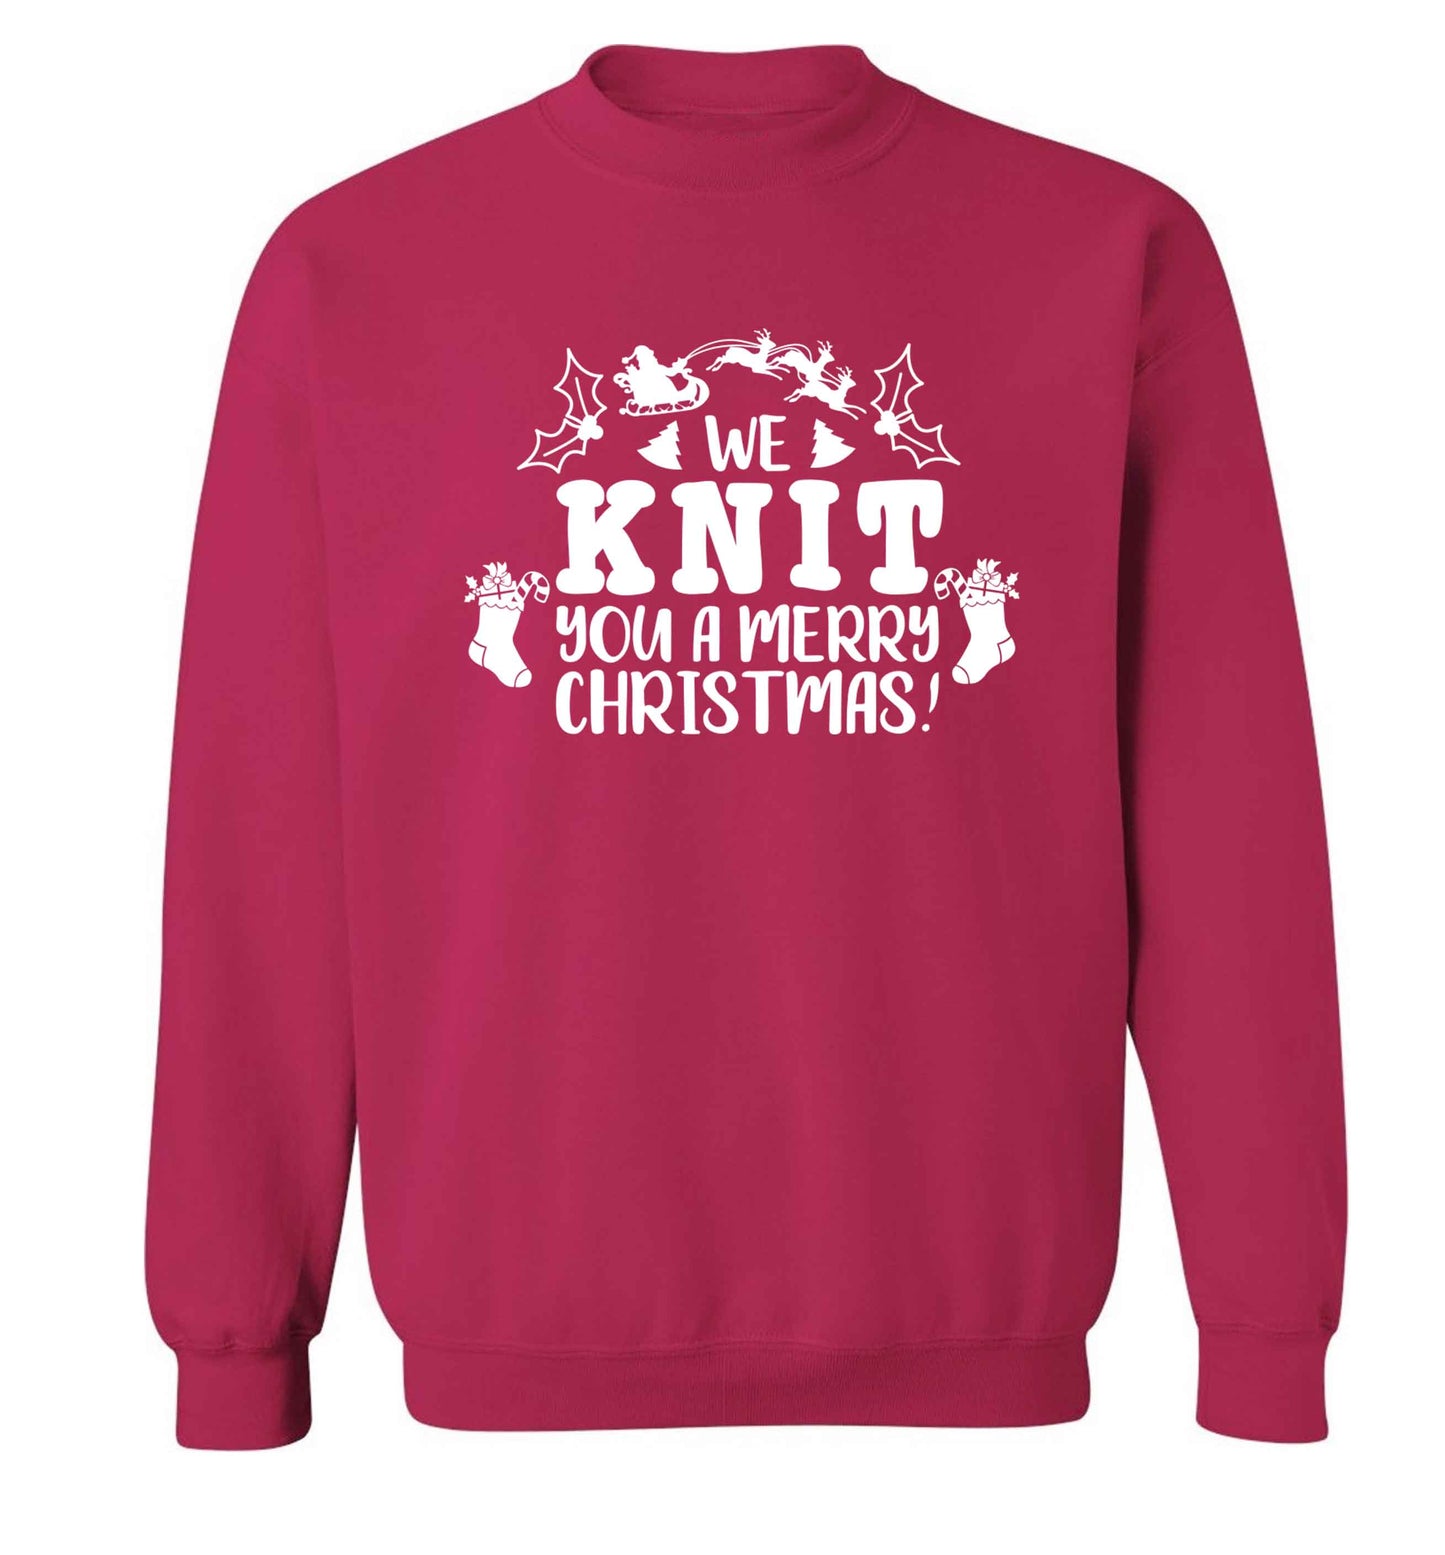 We knit you a merry Christmas Adult's unisex pink Sweater 2XL